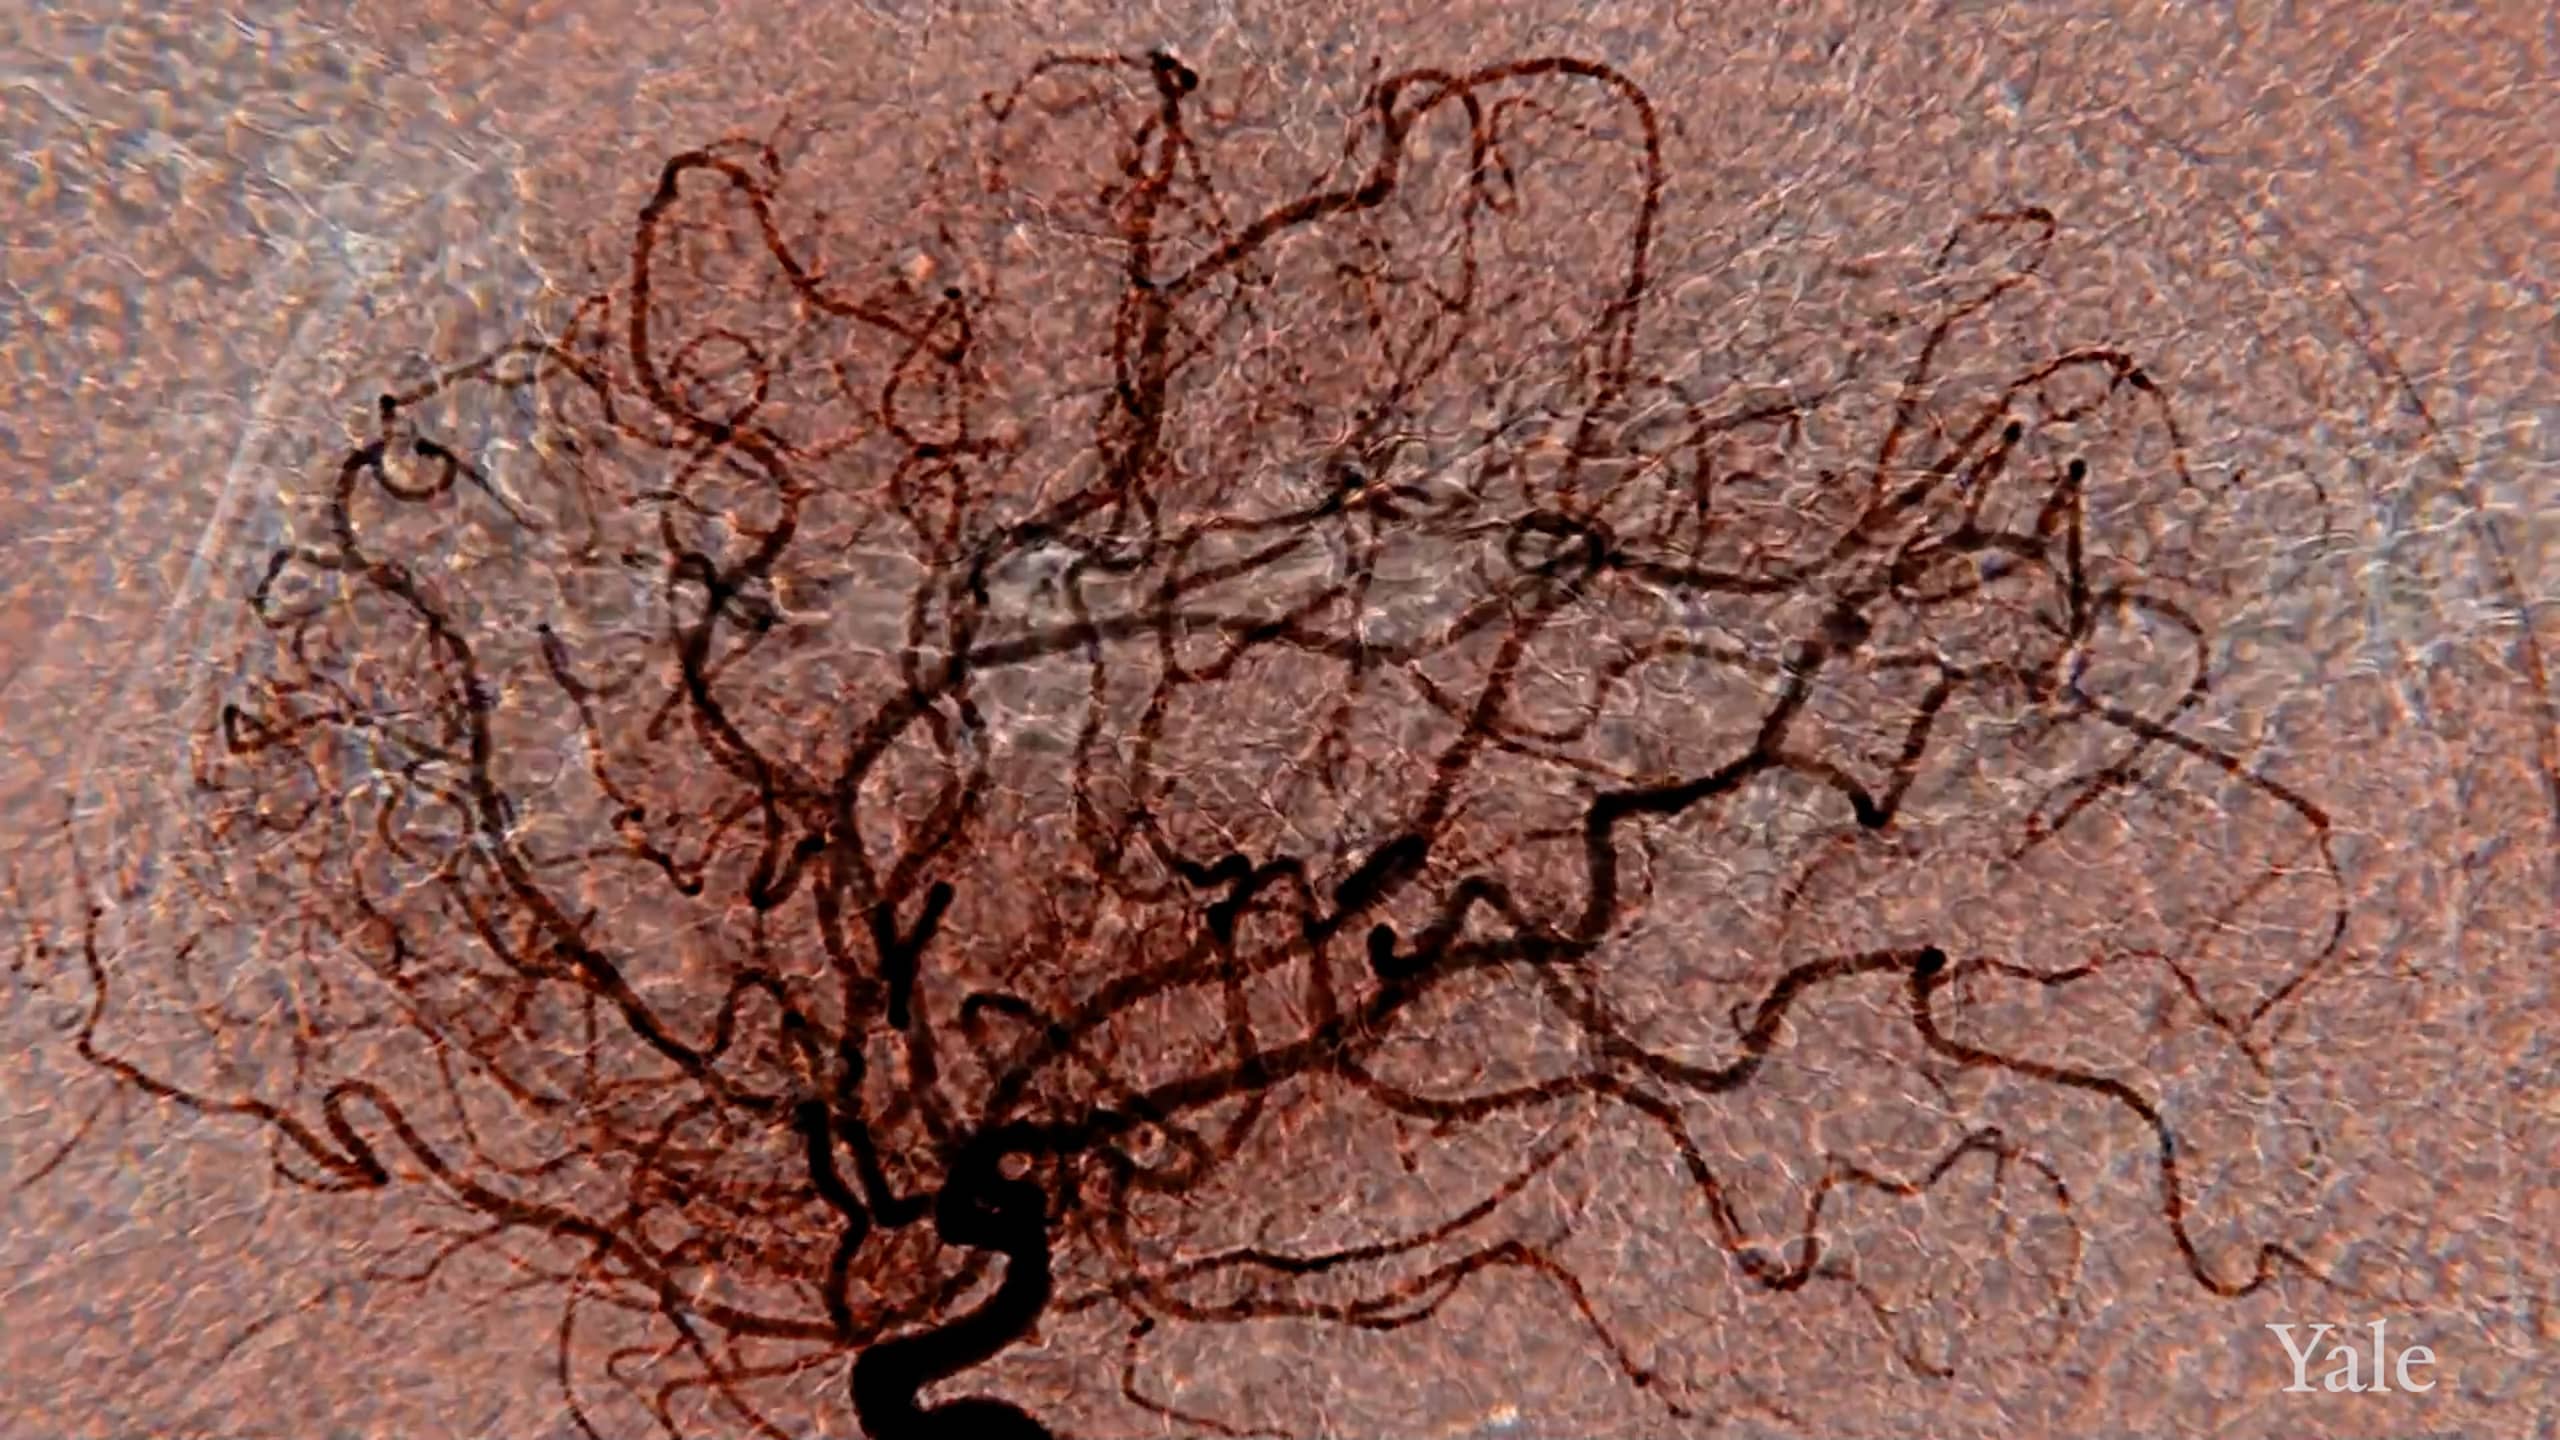 Medical imaging showing blood vessels in the brain with an overlay of red blood cells